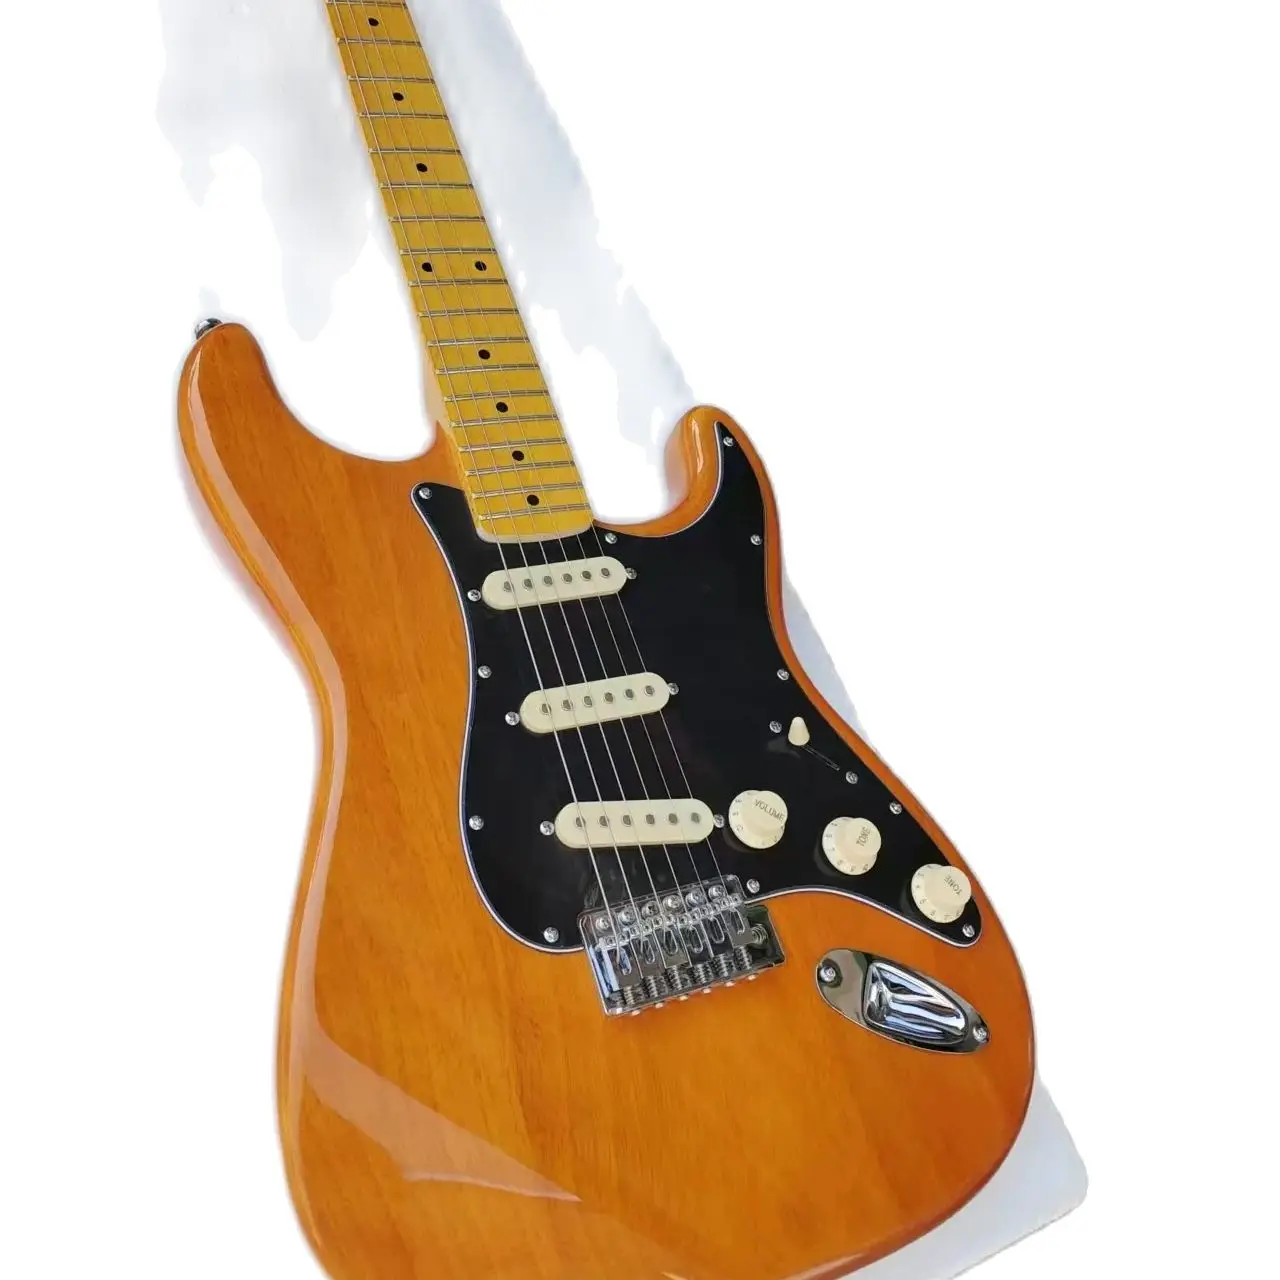 Cream Yellow Electric Guitar, Very Fashionable and Beautiful, Great for Professional Performance